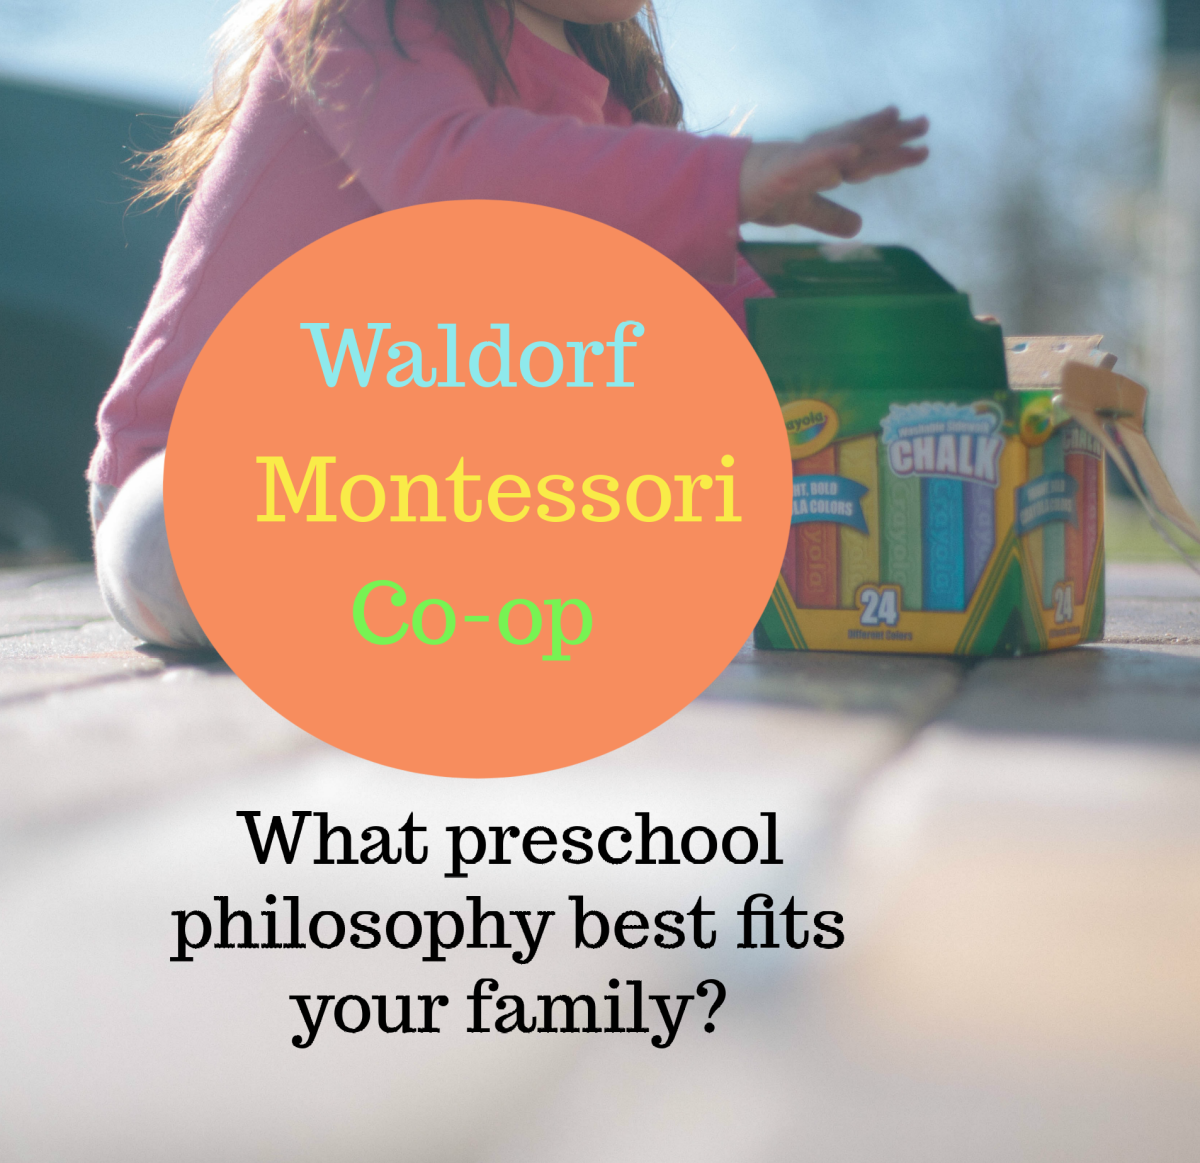 Whether it's Montessori, Waldorf, or play-based cooperatives, parents should choose a preschool that promotes creativity, curiosity, socialization, and hands-on learning.